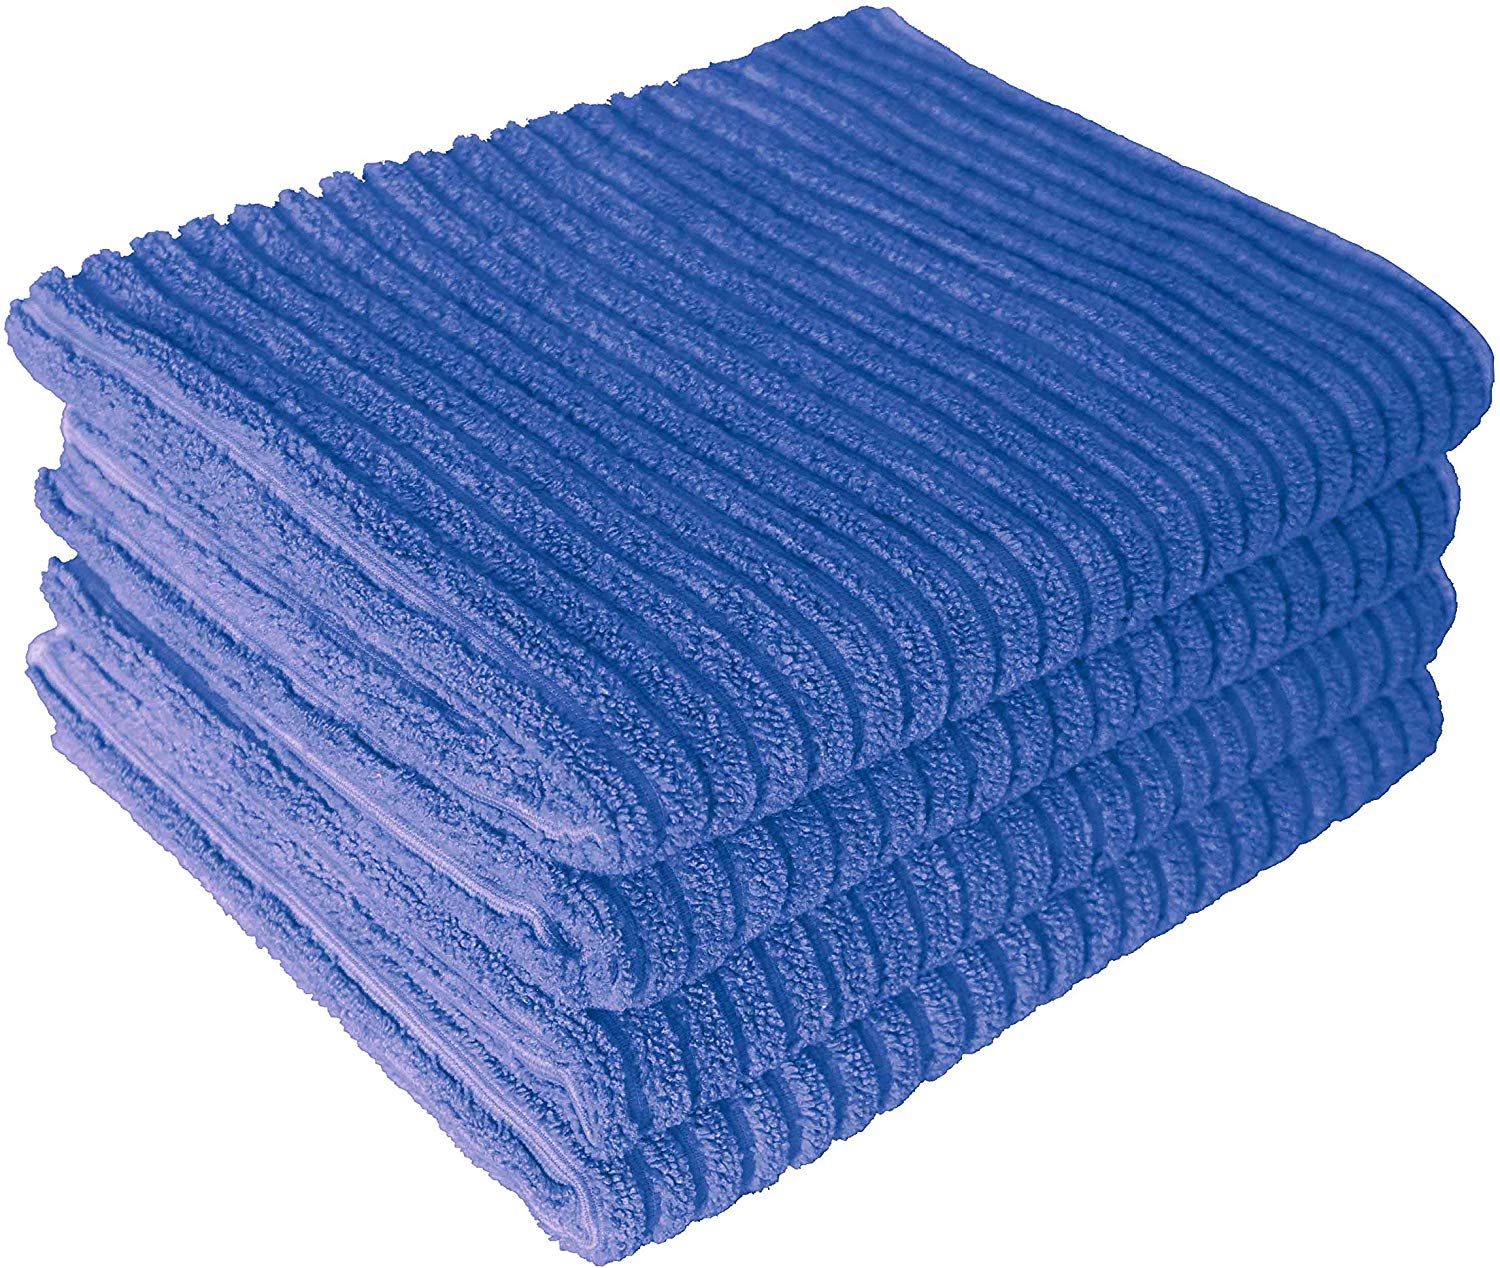 New arrival product Microfiber Kitchen Super Absorbent Dish Towels One Side Smooth Tea cotton Towels